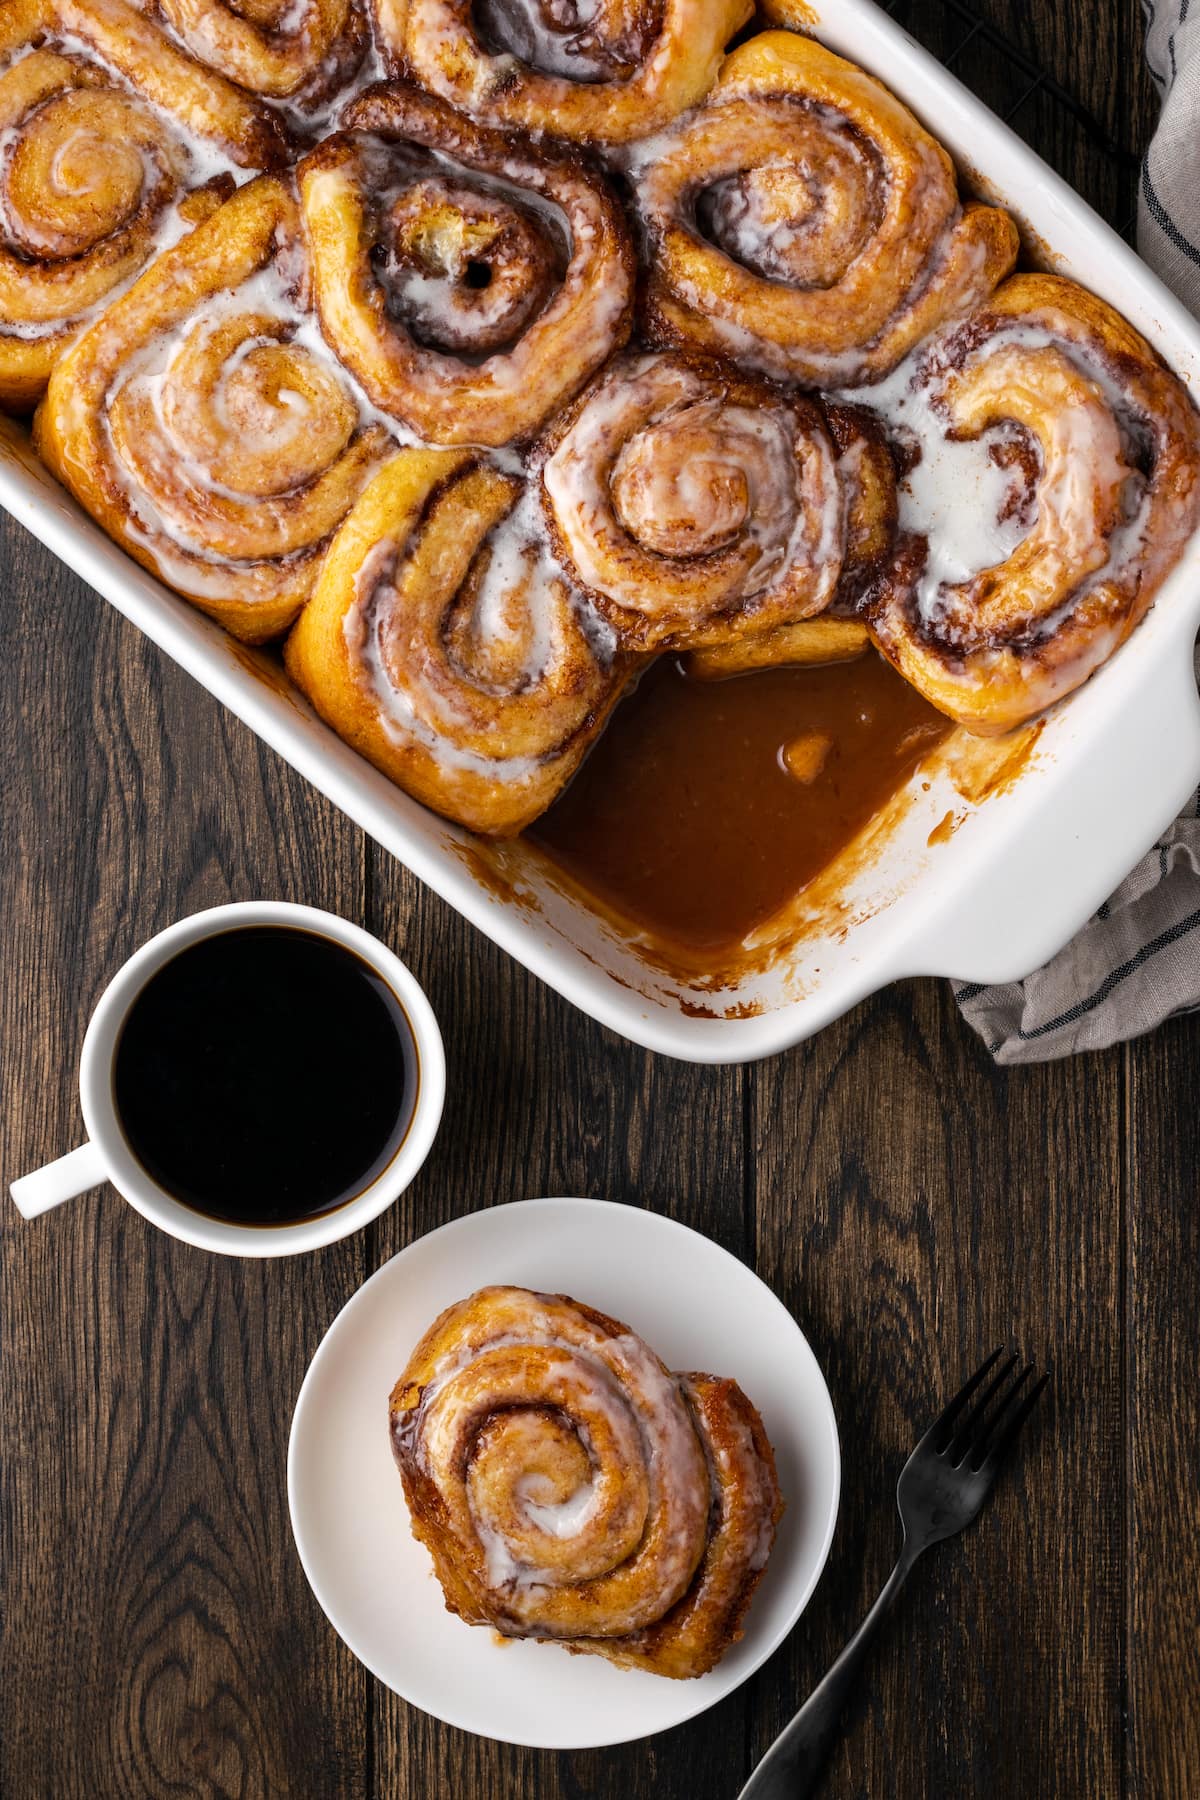 Overhead view of cinnamon rolls in a baking dish, next to one cinnamon roll served on a plate next to a cup of coffee.